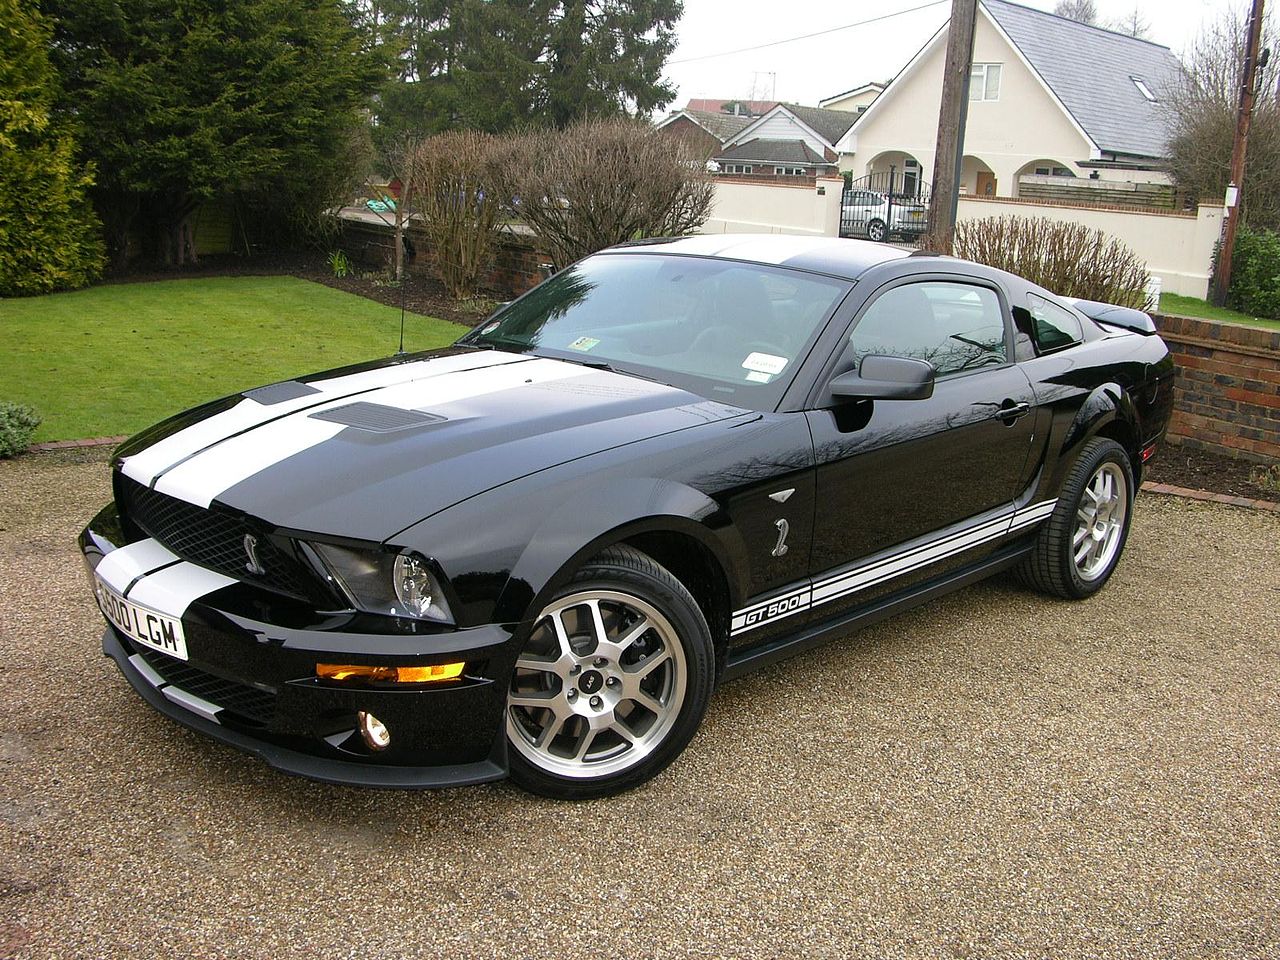 File:2008 Ford Mustang Shelby GT500 - Flickr - The Car Spy (29).jpg -  Wikimedia Commons